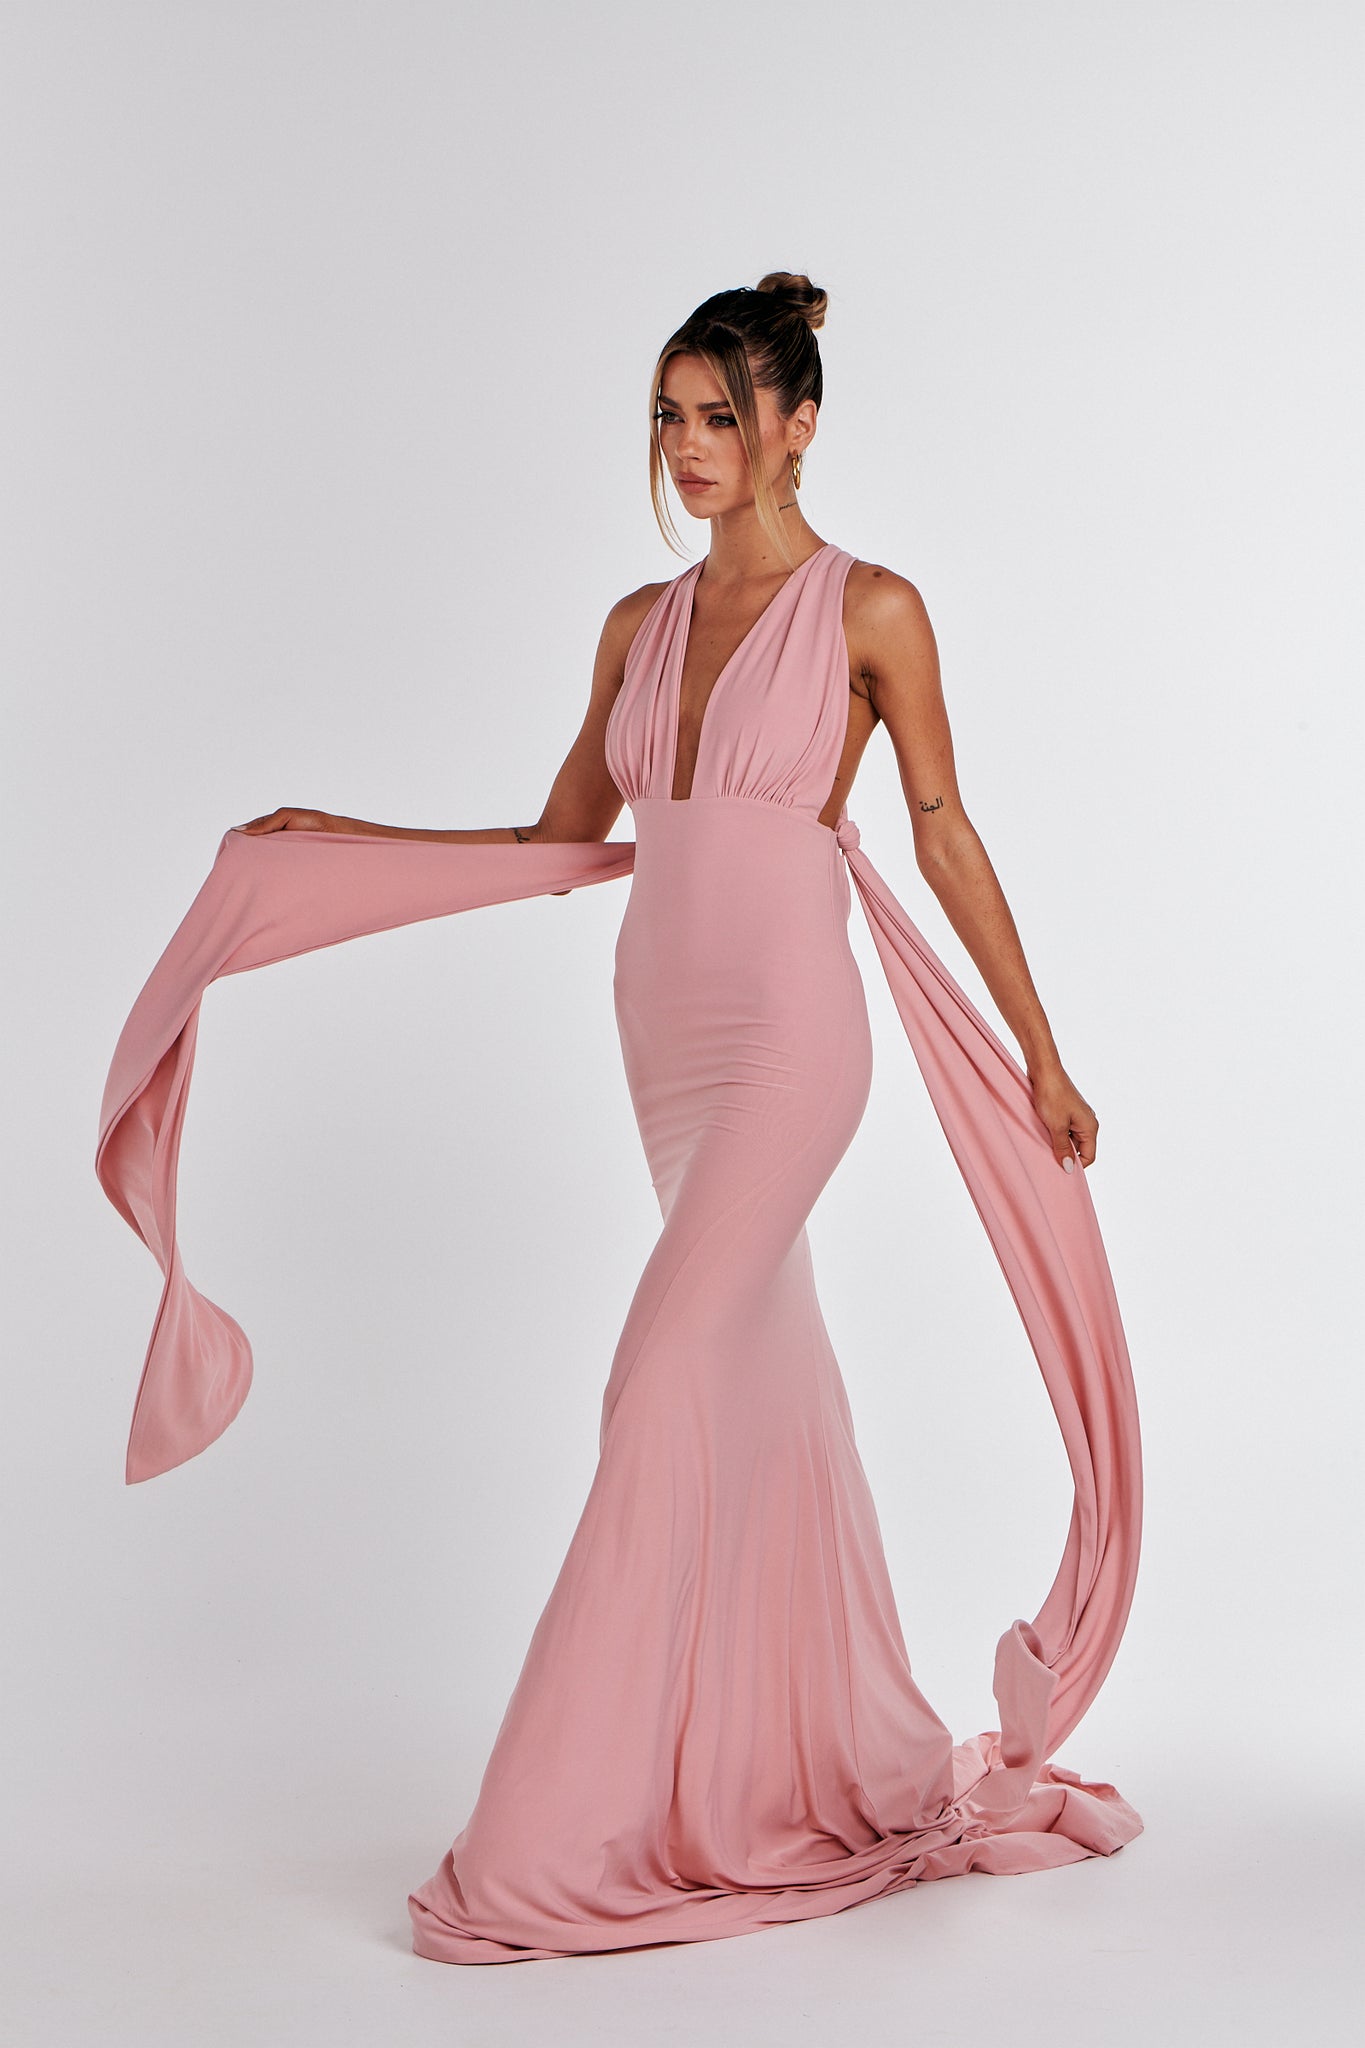 MÉLANI The Label ELIANA Blush Multi Tie Backless Bridesmaid Formal Gown